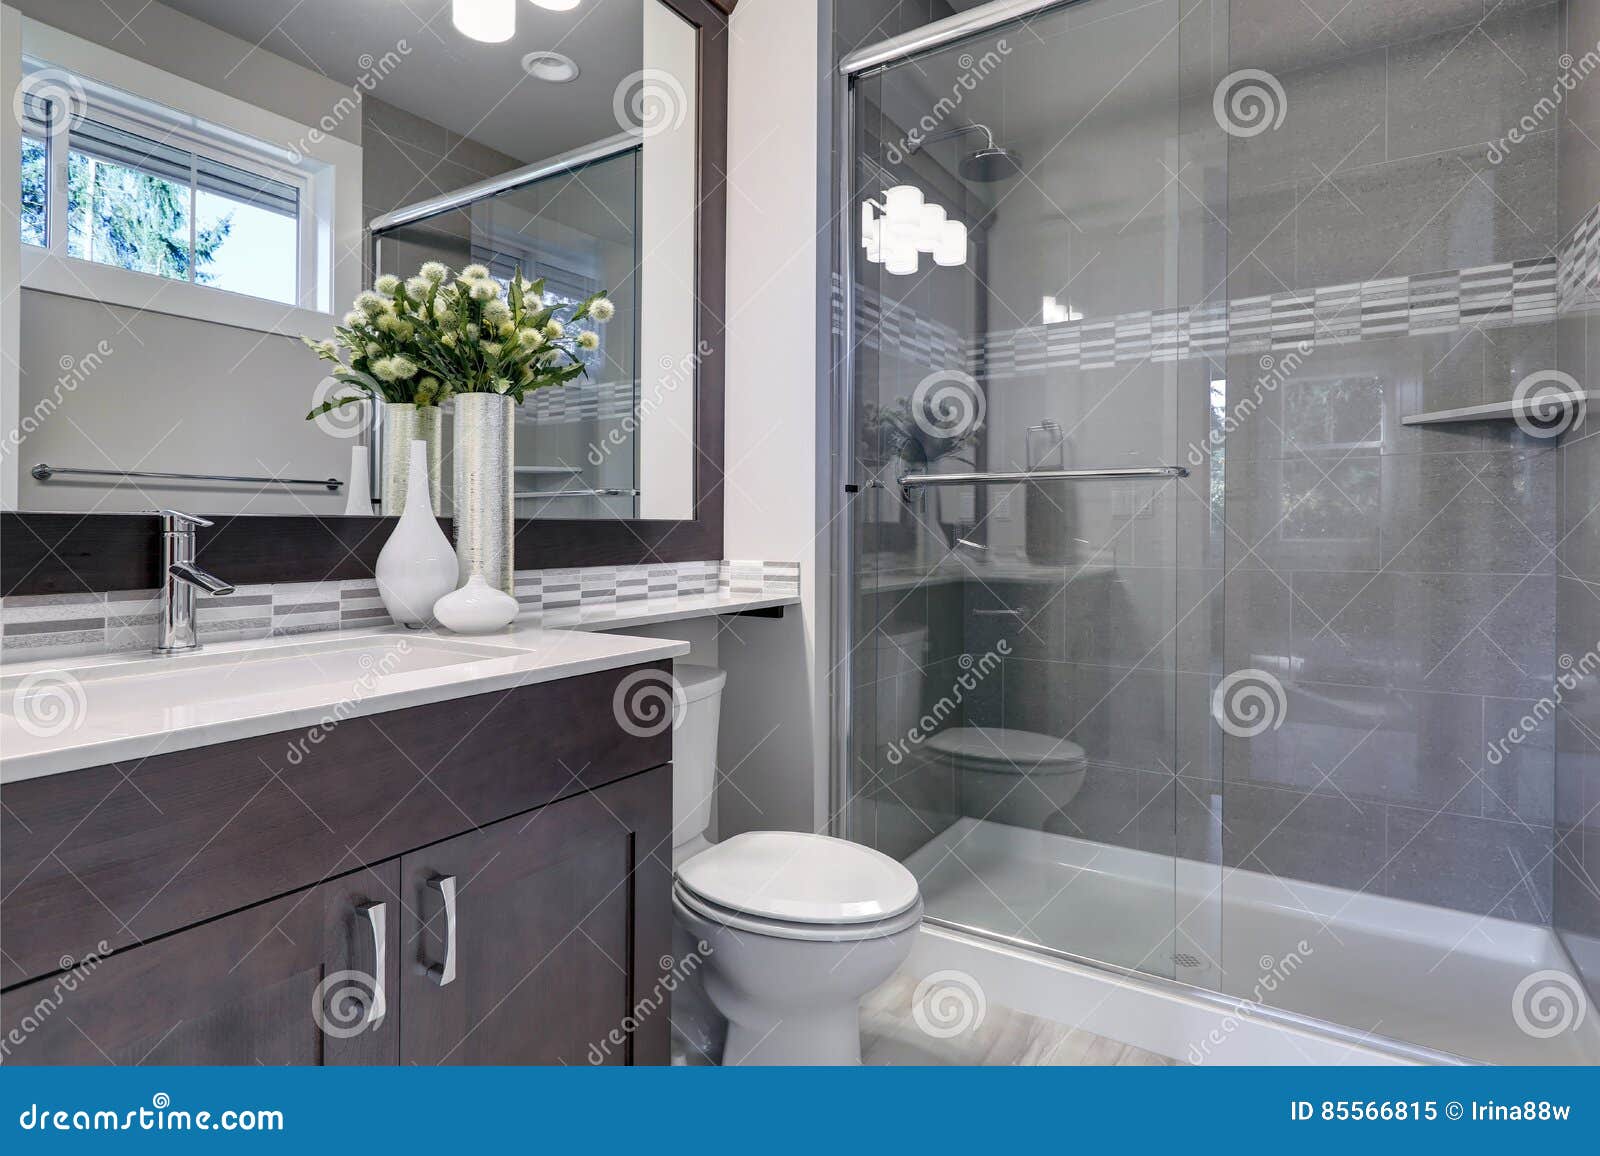 bright new bathroom interior with glass walk in shower